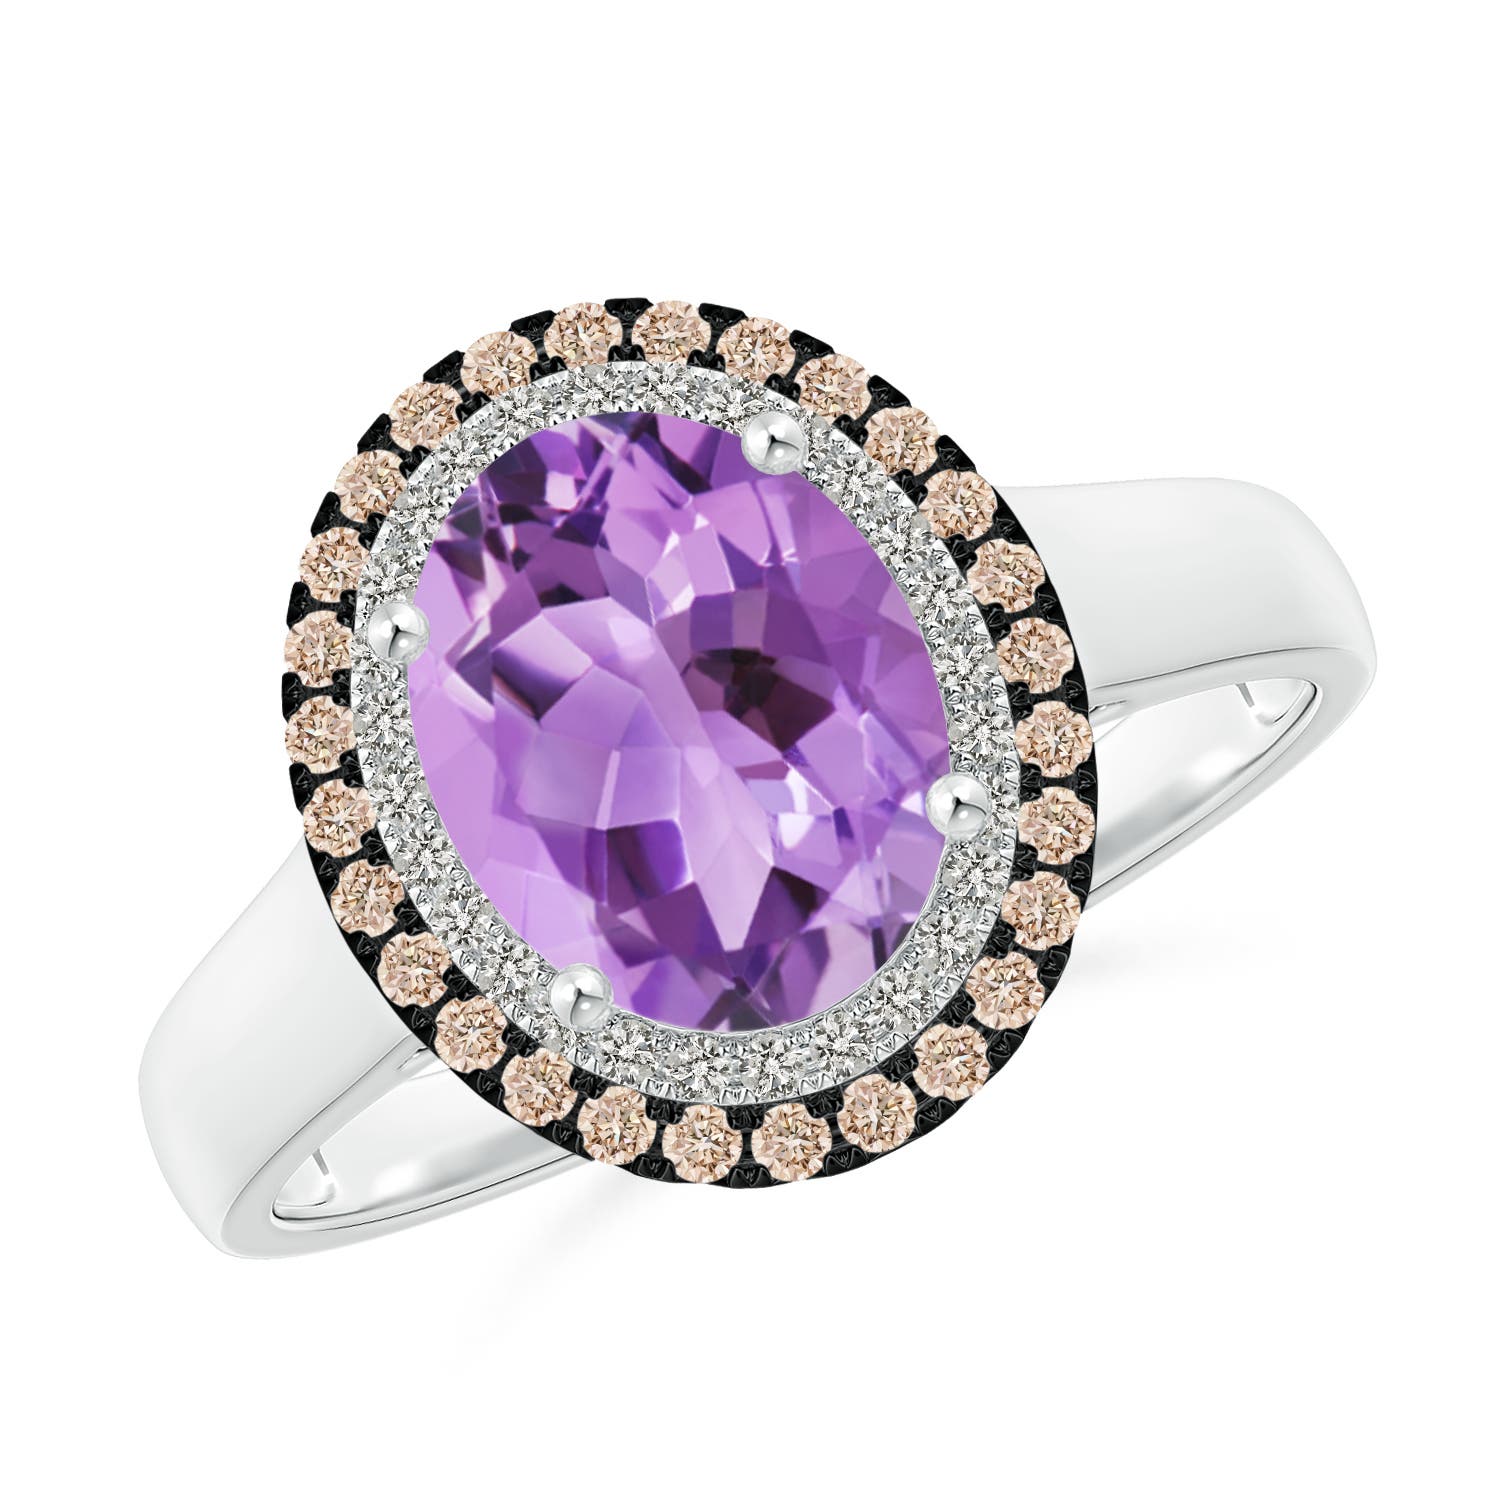 A - Amethyst / 1.87 CT / 14 KT White Gold